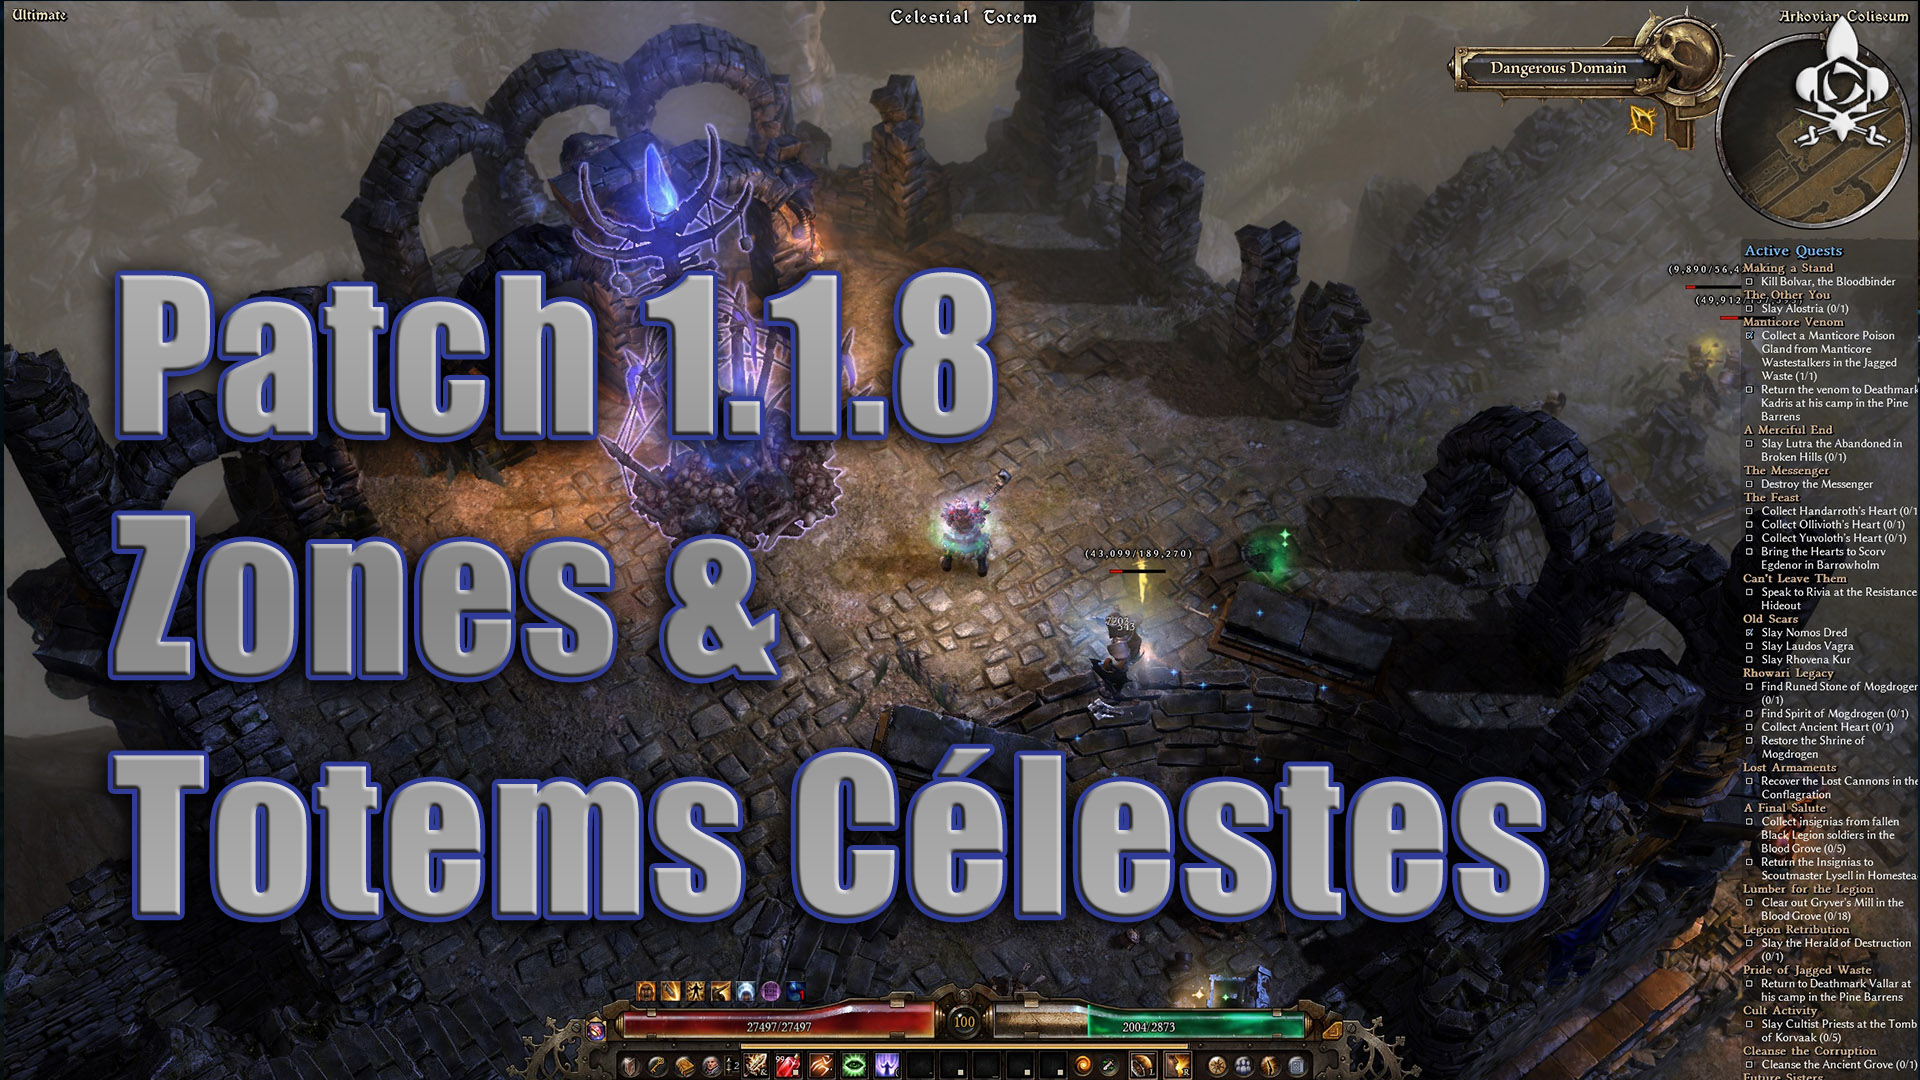 Patch 1.1.8 Sky Zones and Totems